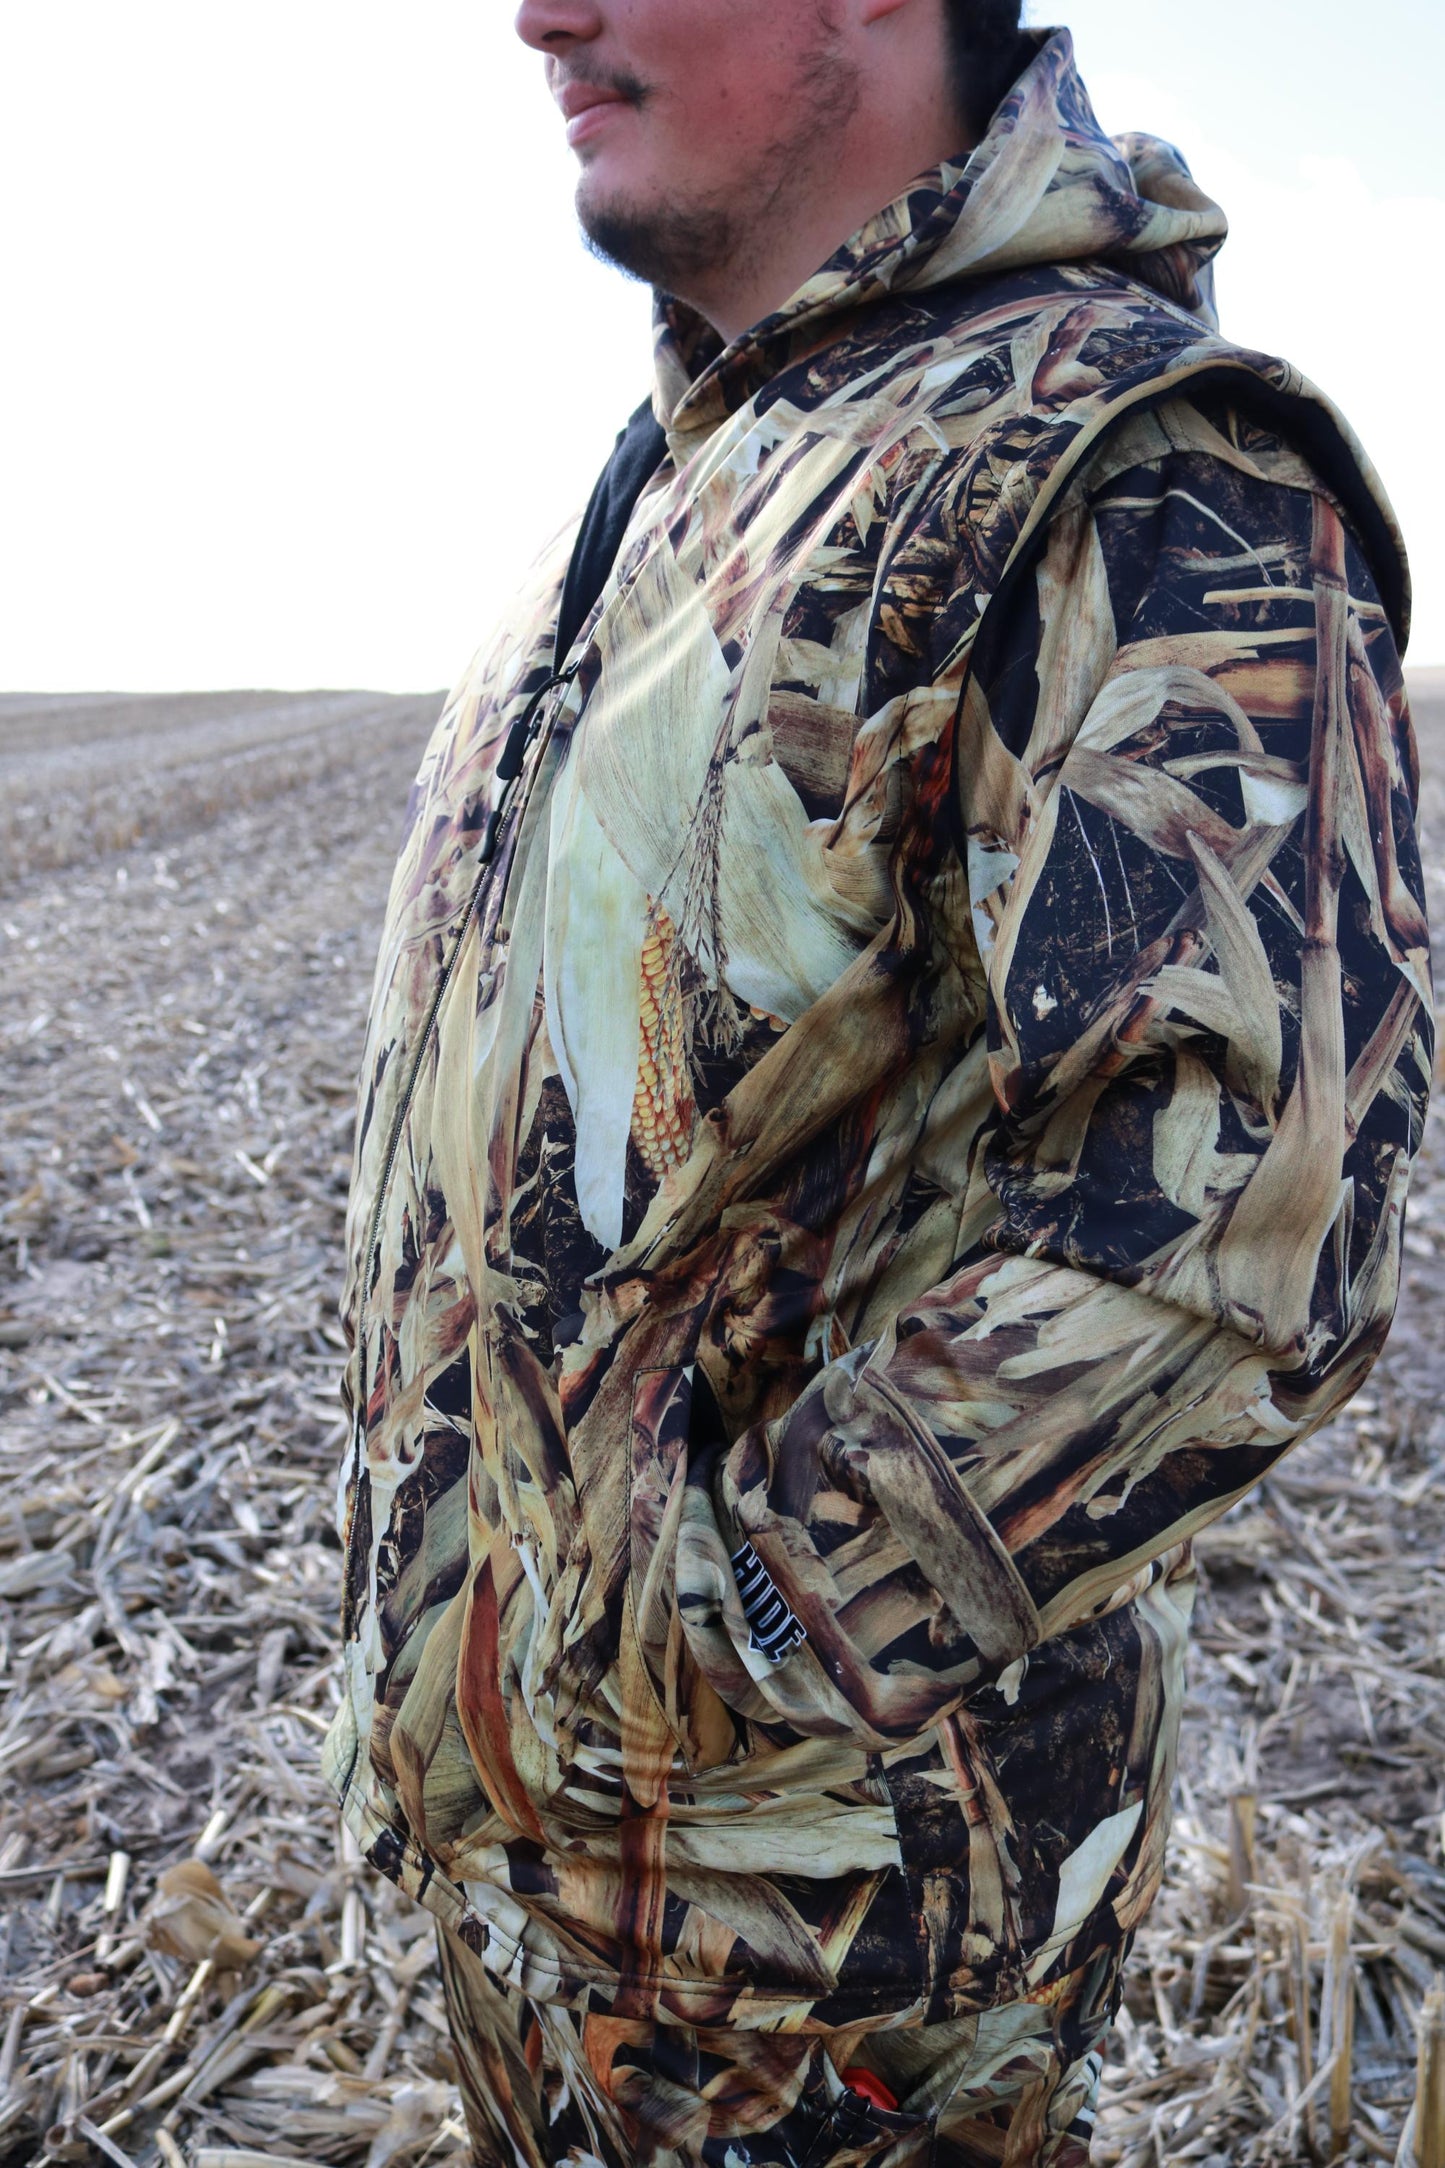 Clearance - Fall Corn Stalk - Water Resistant 360 Vest